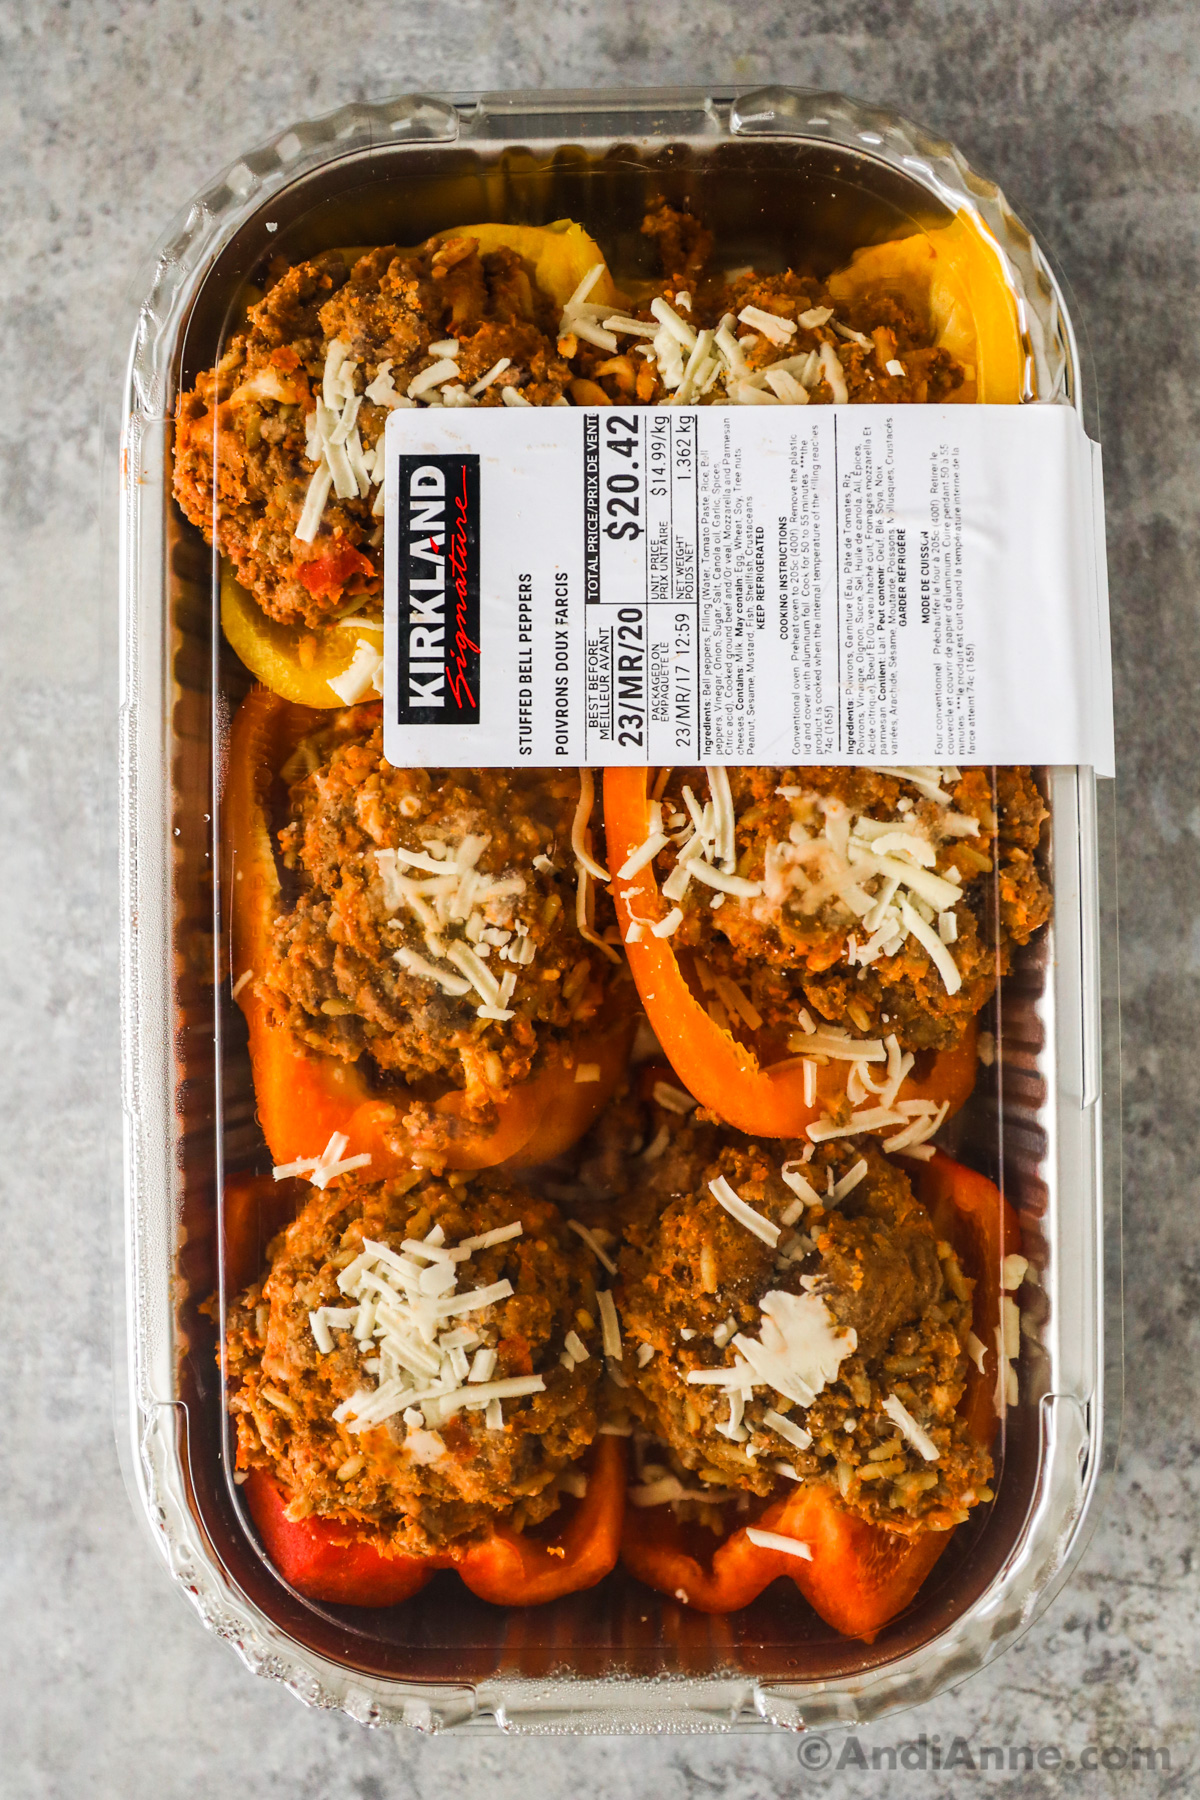 A container of Costco stuffed bell peppers.